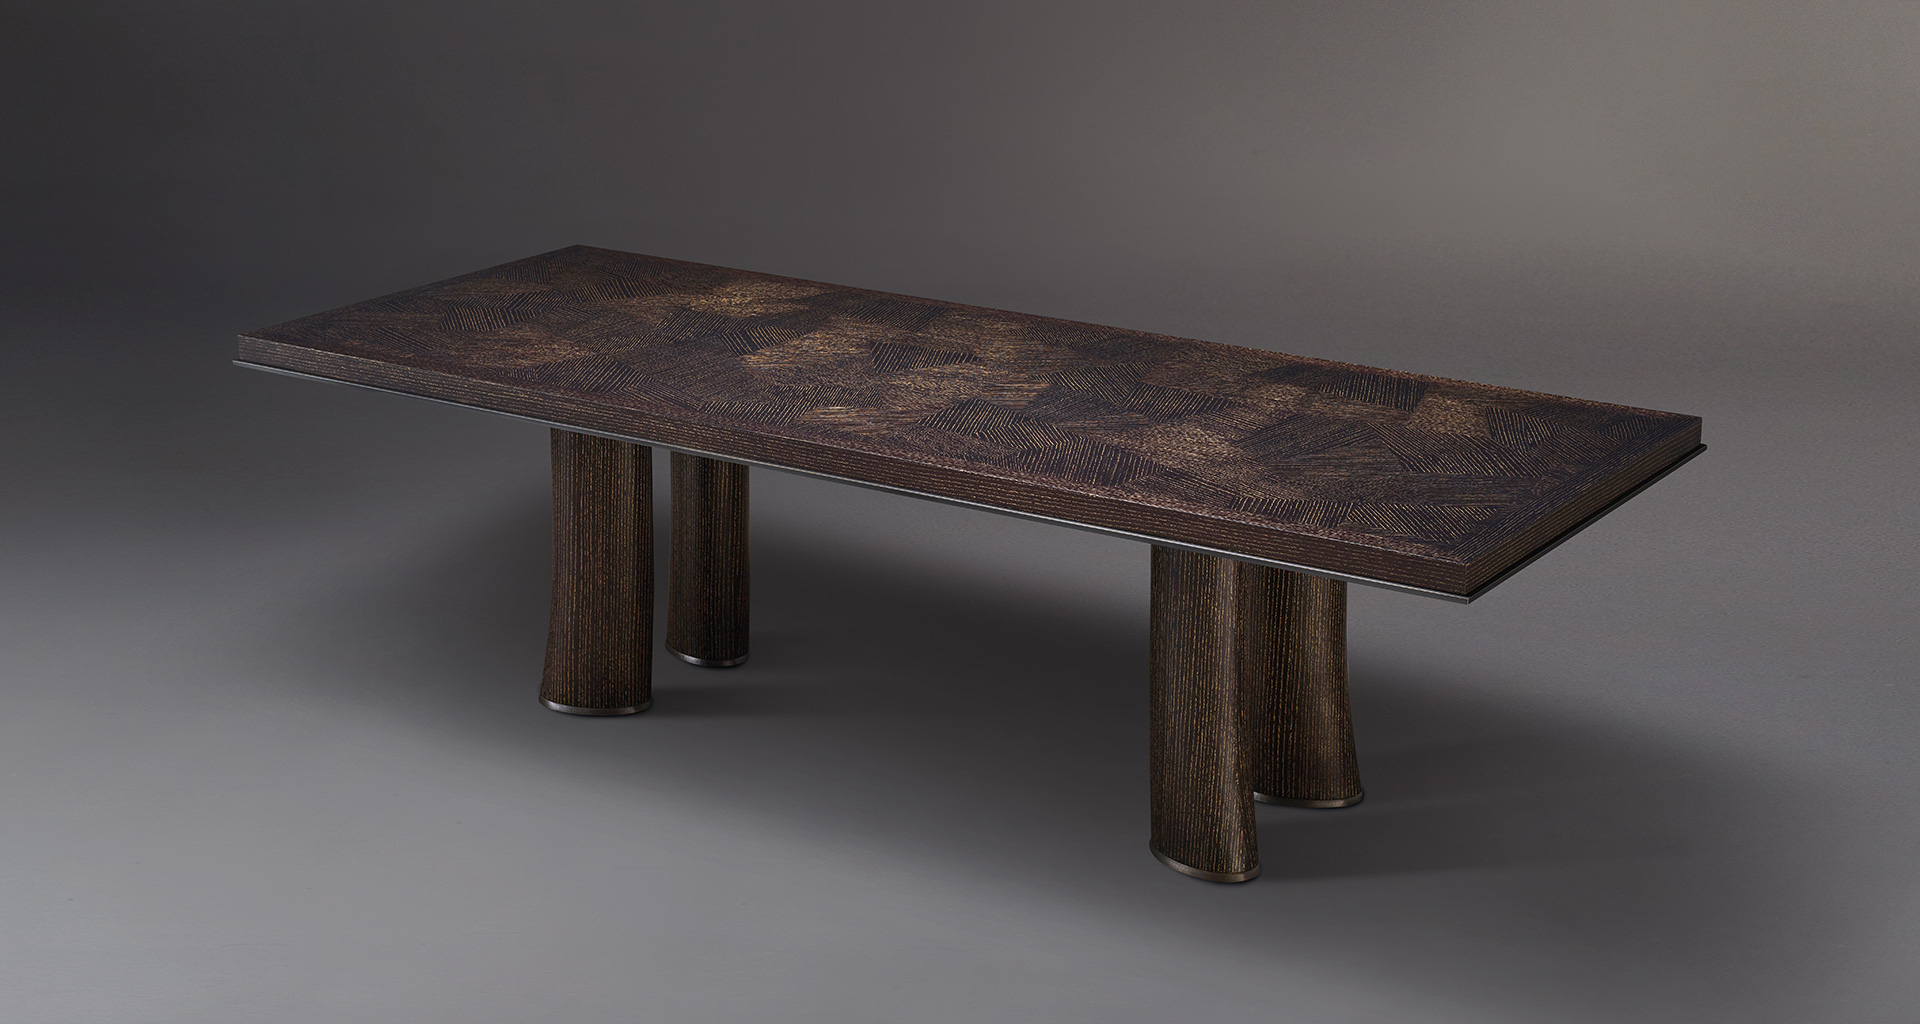 Andalù is a wooden dining table with bronze profile and feet, from Promemoria's catalogue | Promemoria